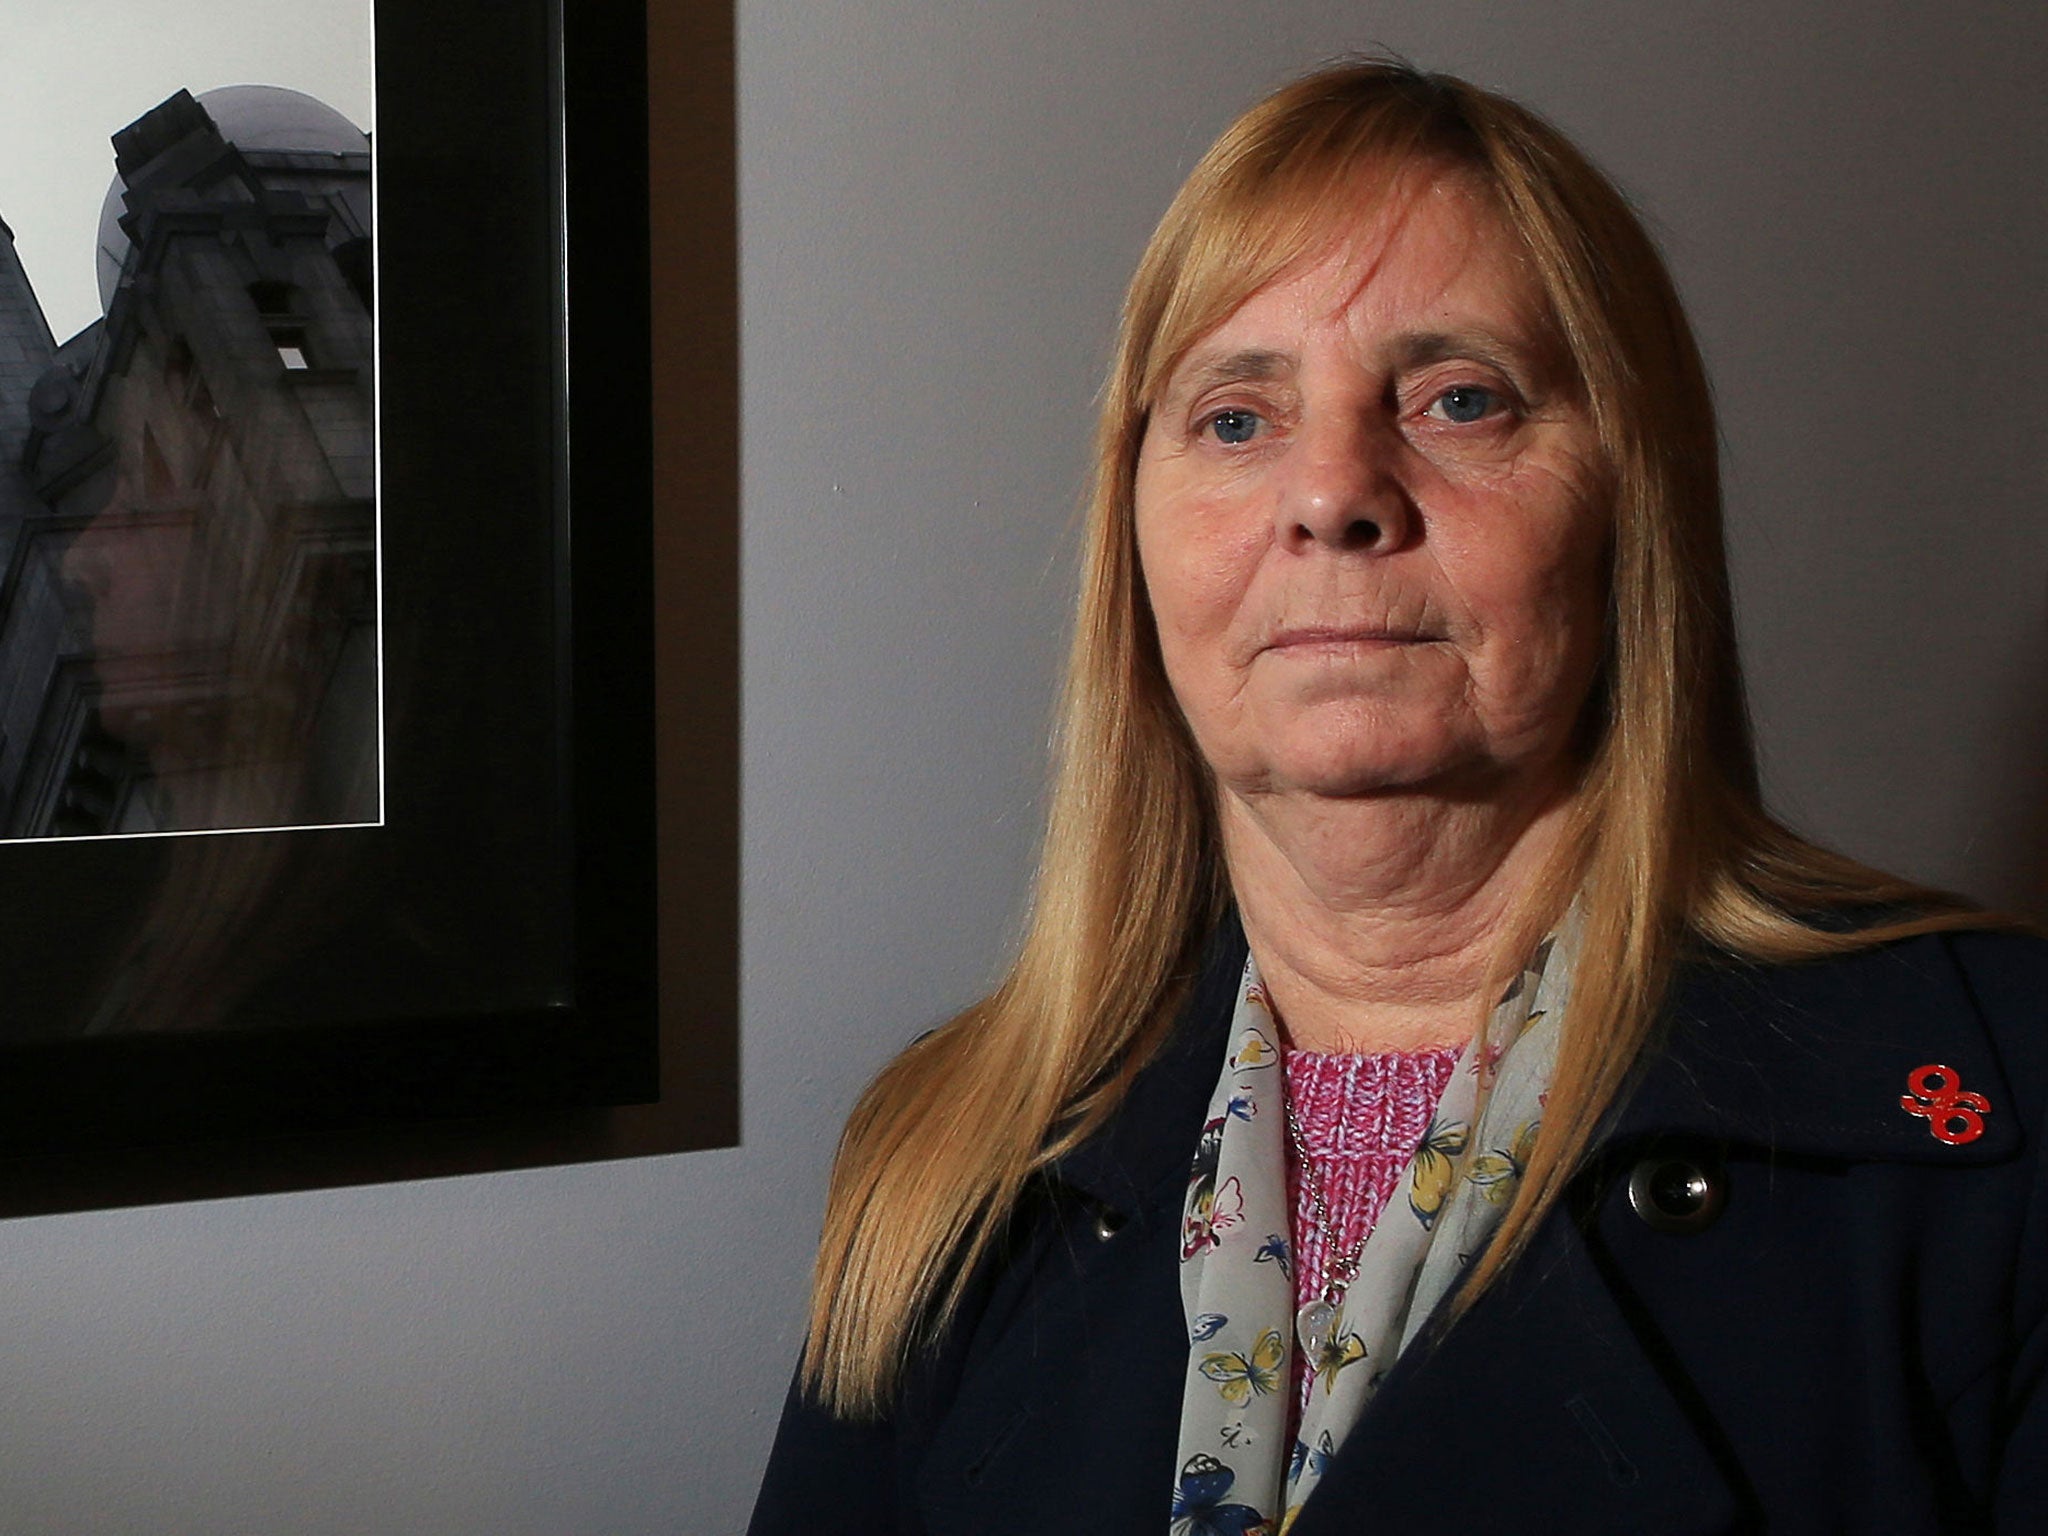 Margaret Aspinall, chair of the Hillsborough Family Support Group